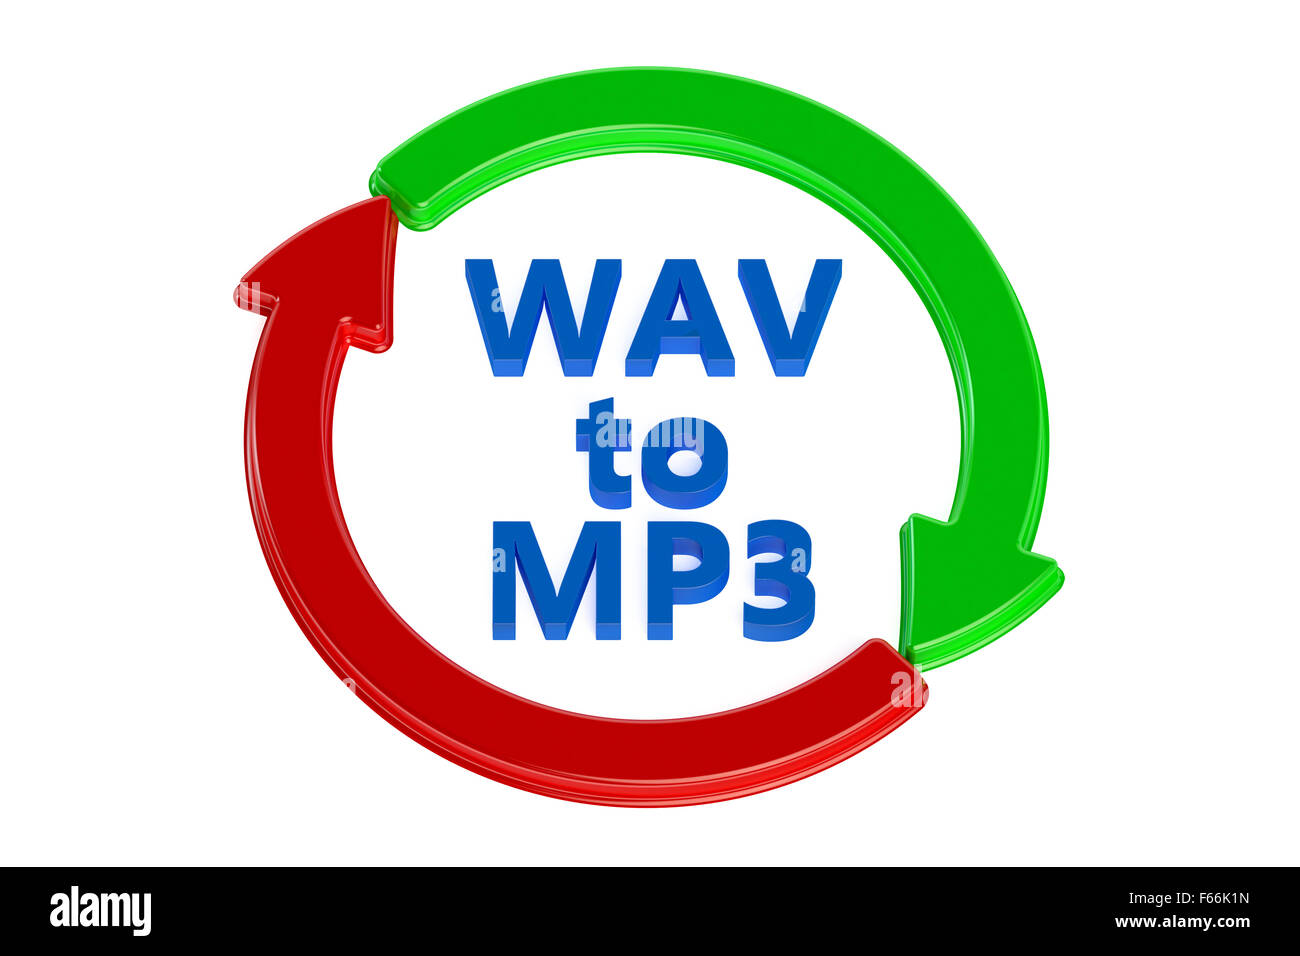 converting wav to mp3 concept isolated on white background Stock Photo